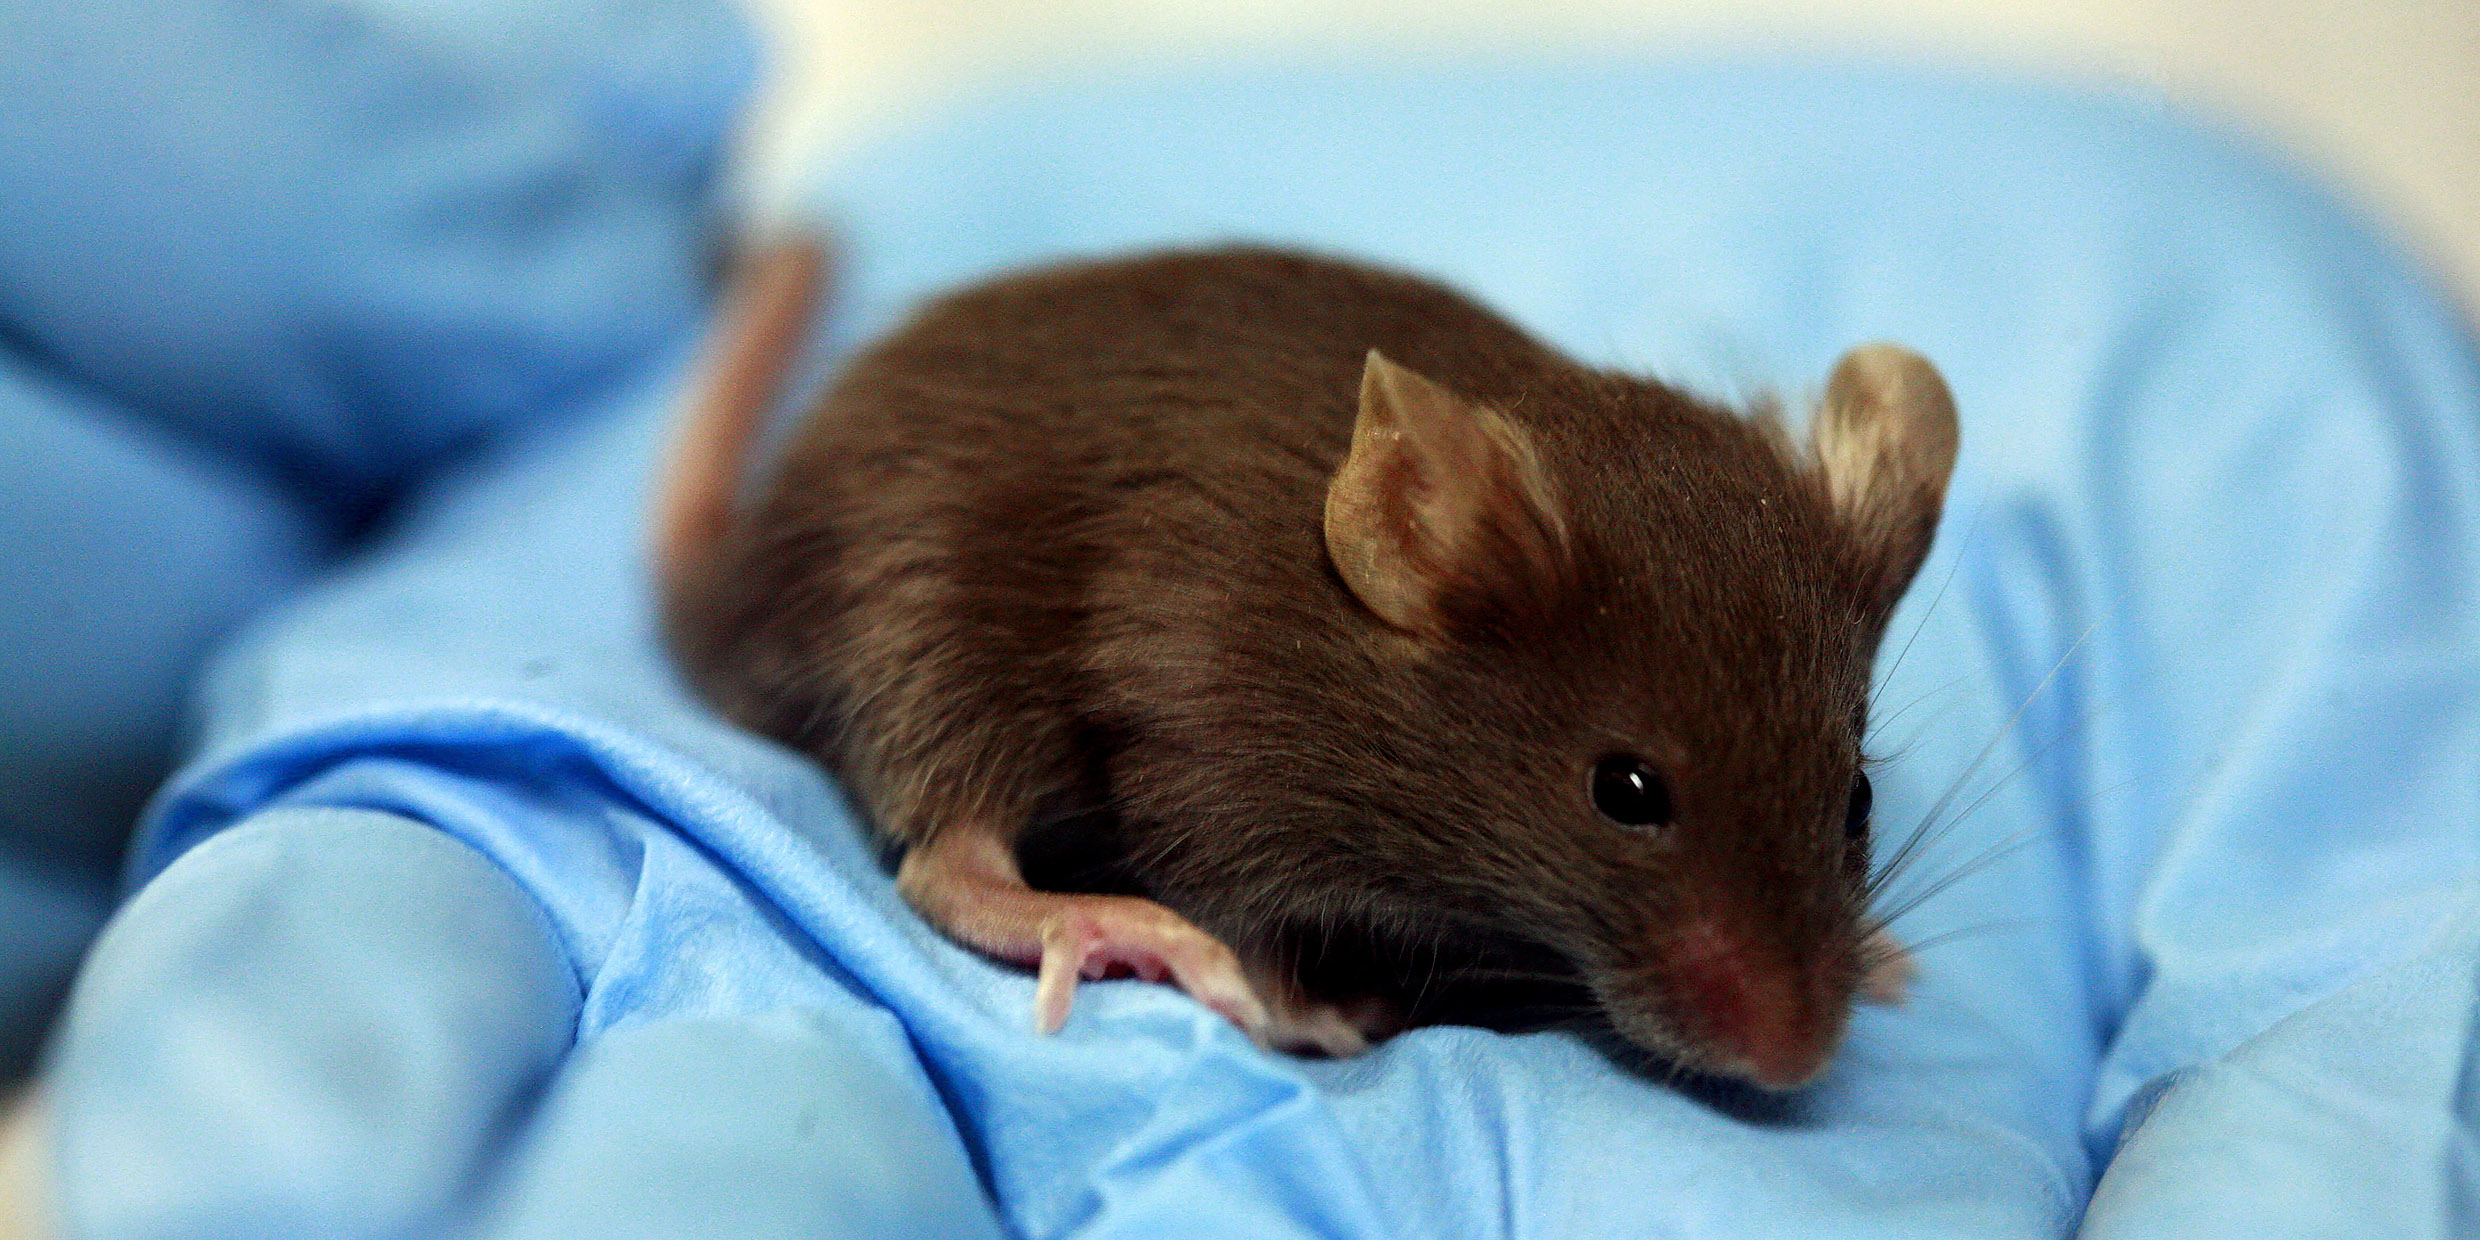 Image of a brown mouse held by a gloved hand